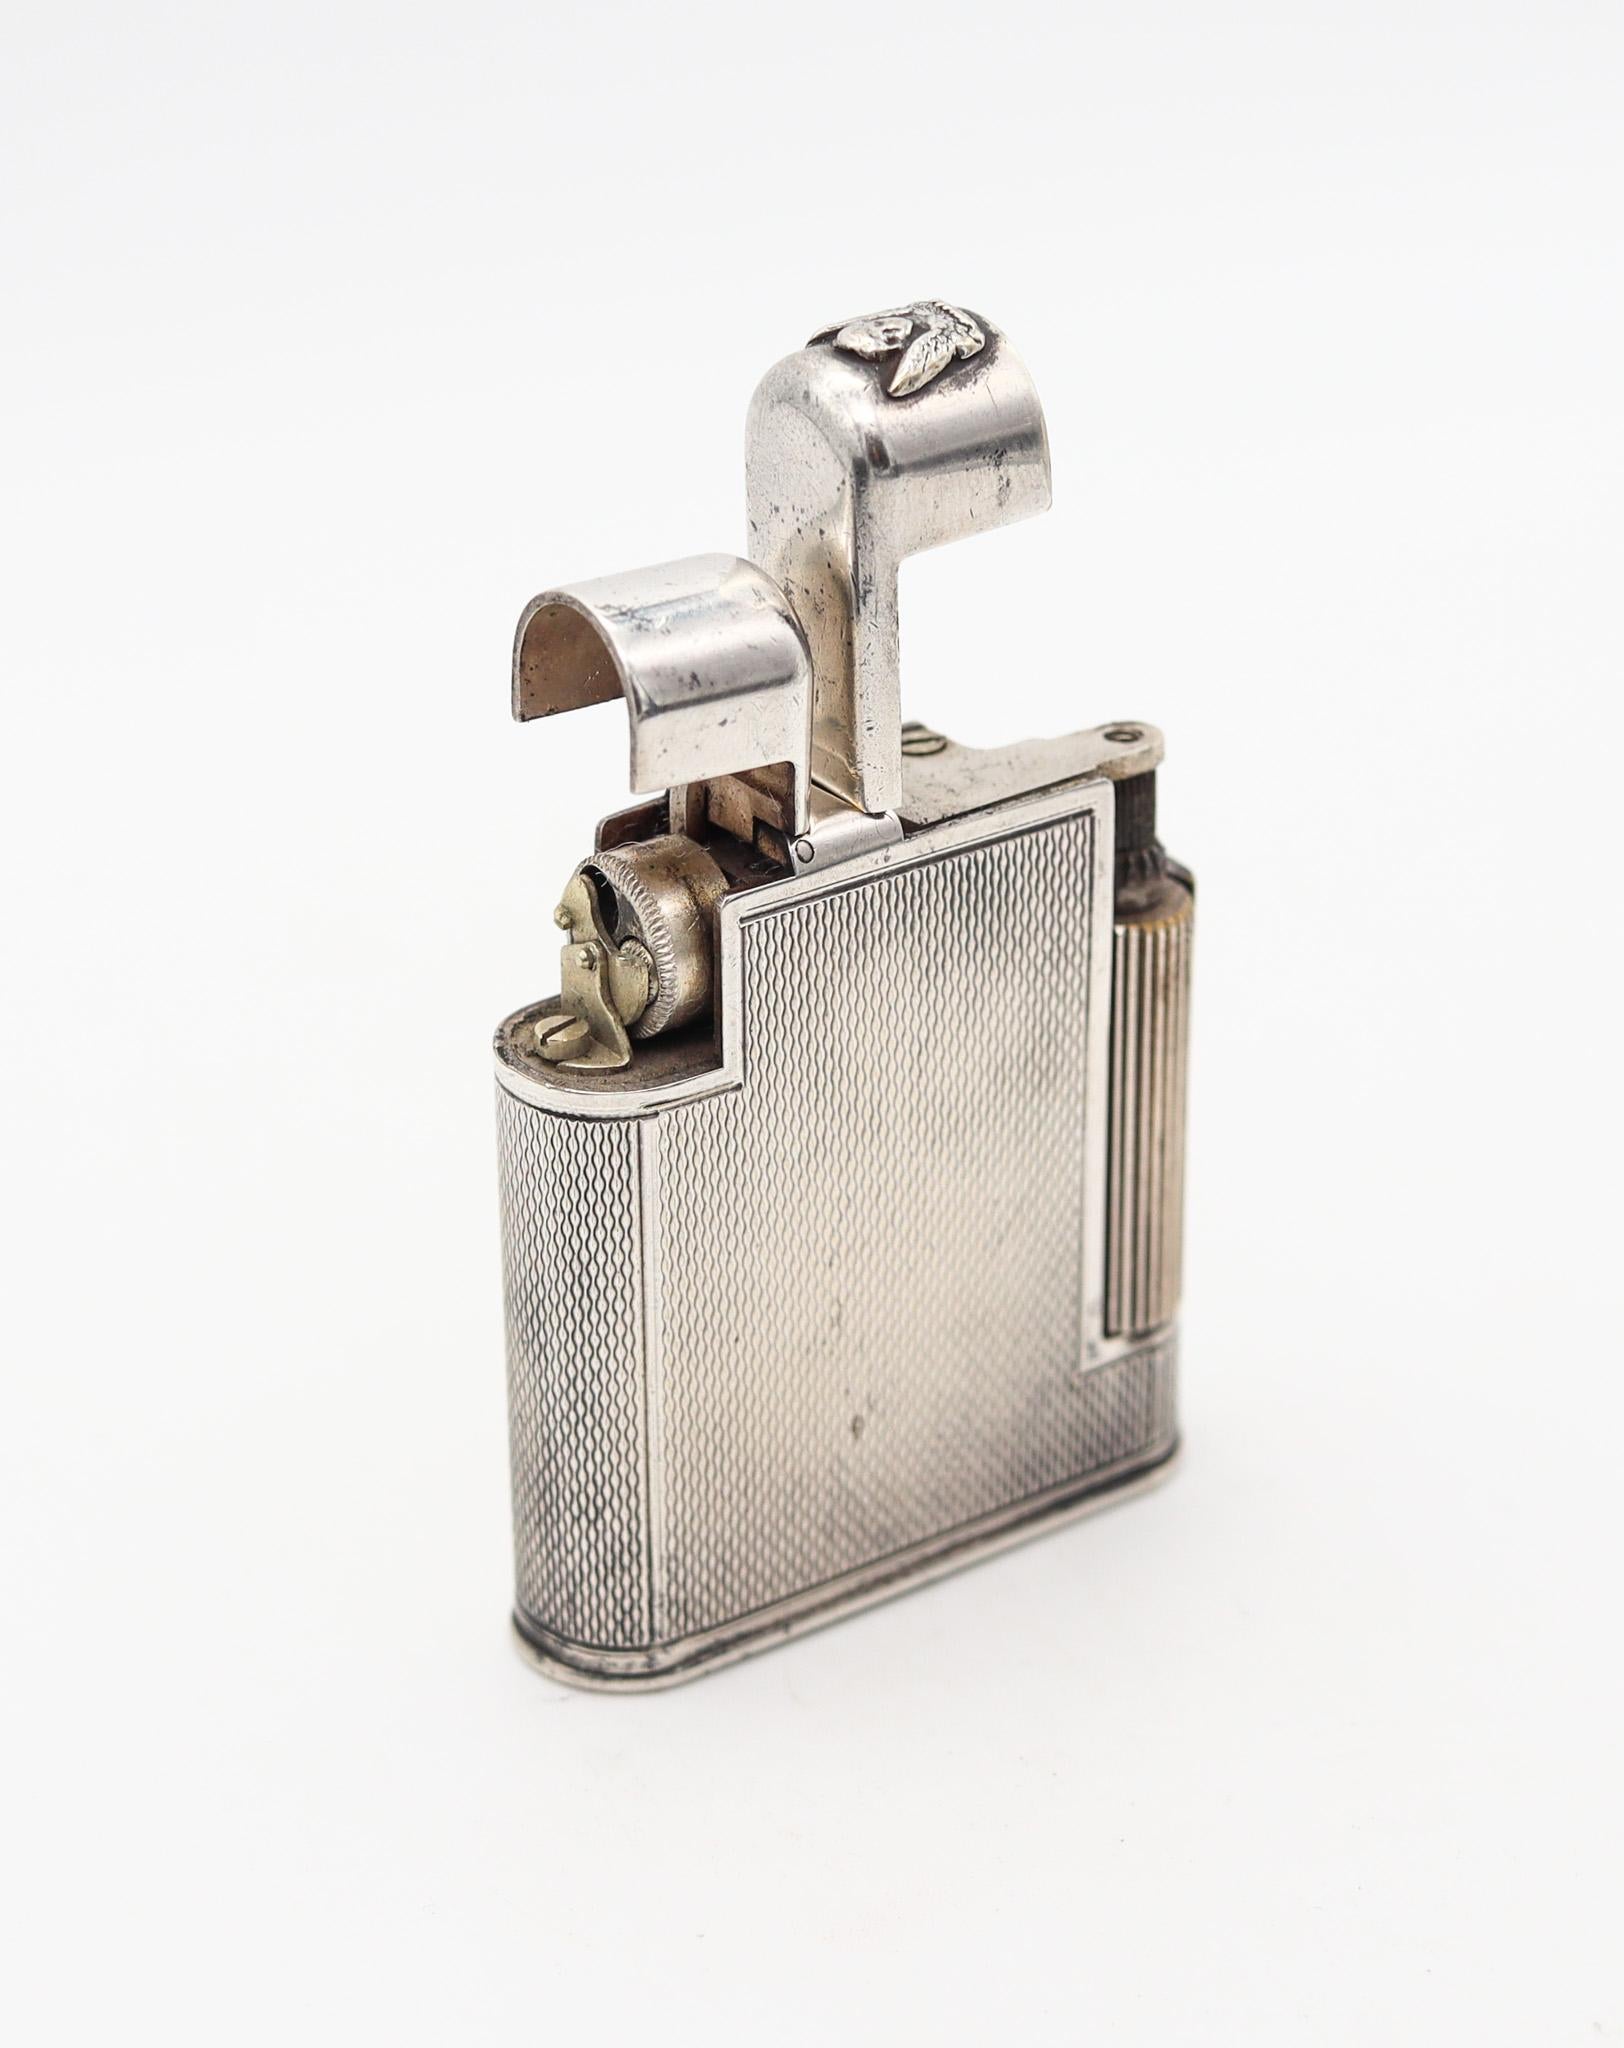 The Charles petrol lighter designed by Meyer Maximilian Levene

An exceptional and rare silver-plated 'The Charles' petrol pocket lighter stamped 'The Charles Lighter', made in London England, back in the 1947. It was rafted with slim rectangular